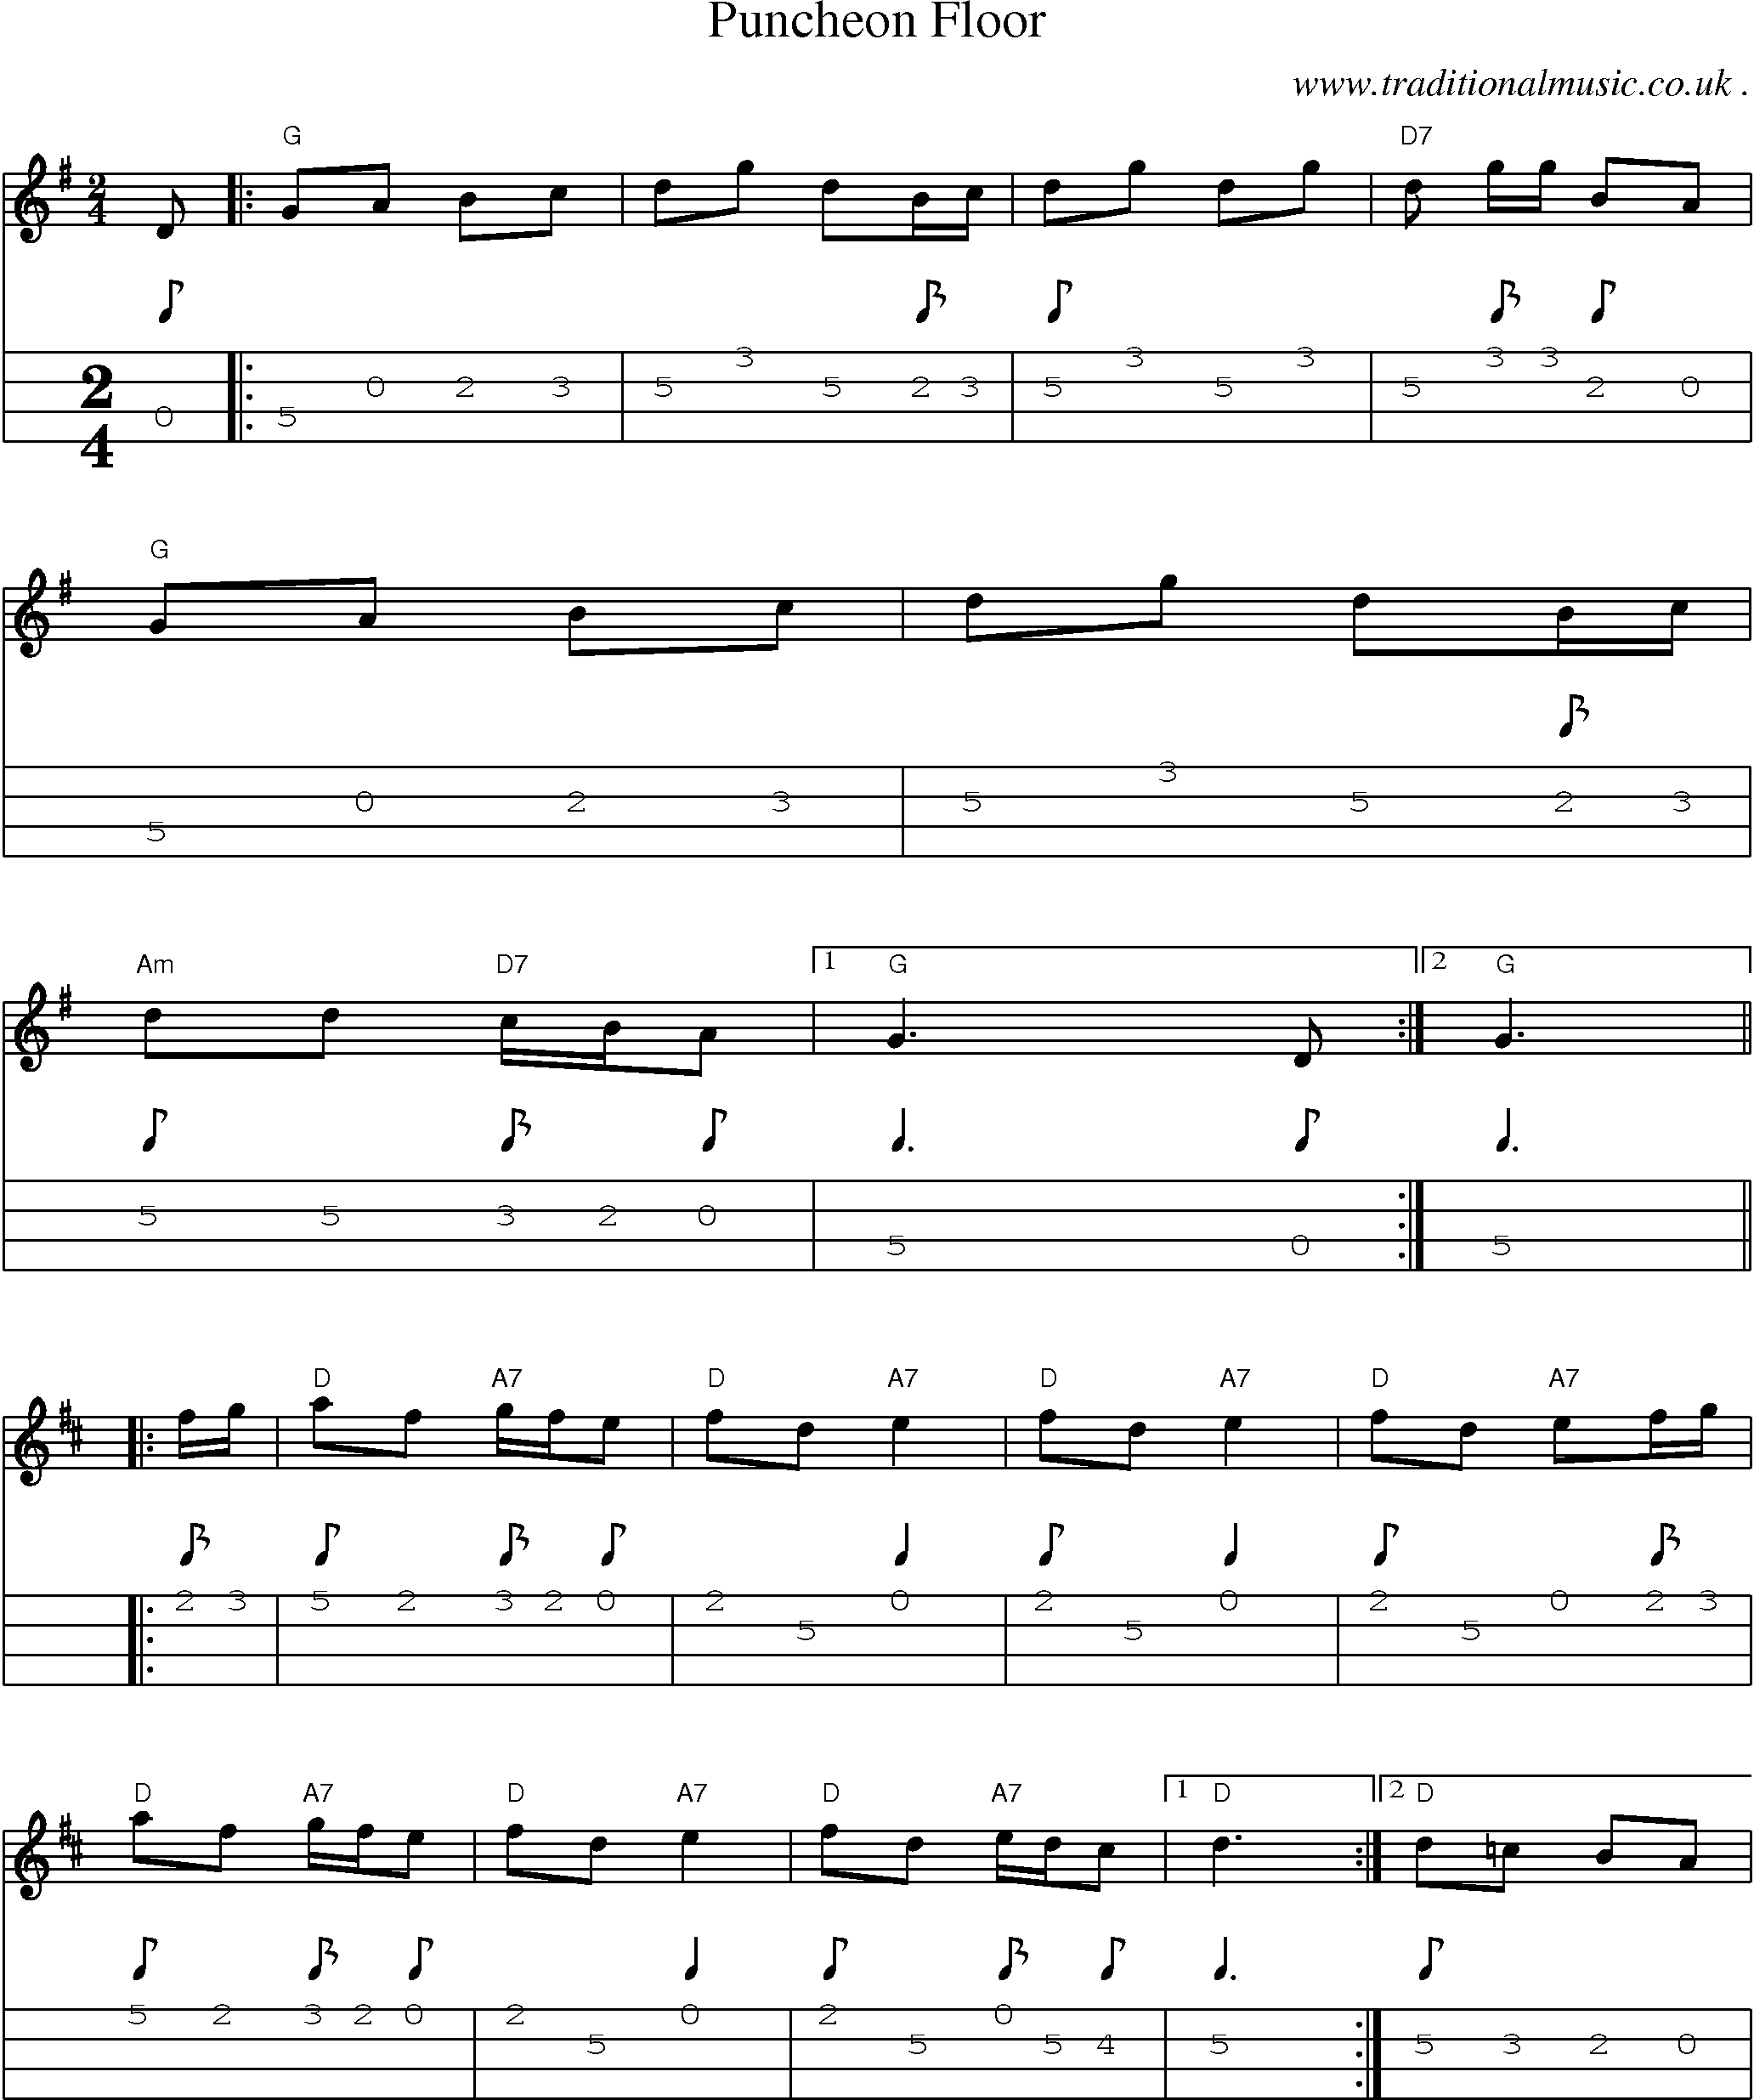 Music Score and Guitar Tabs for Puncheon Floor